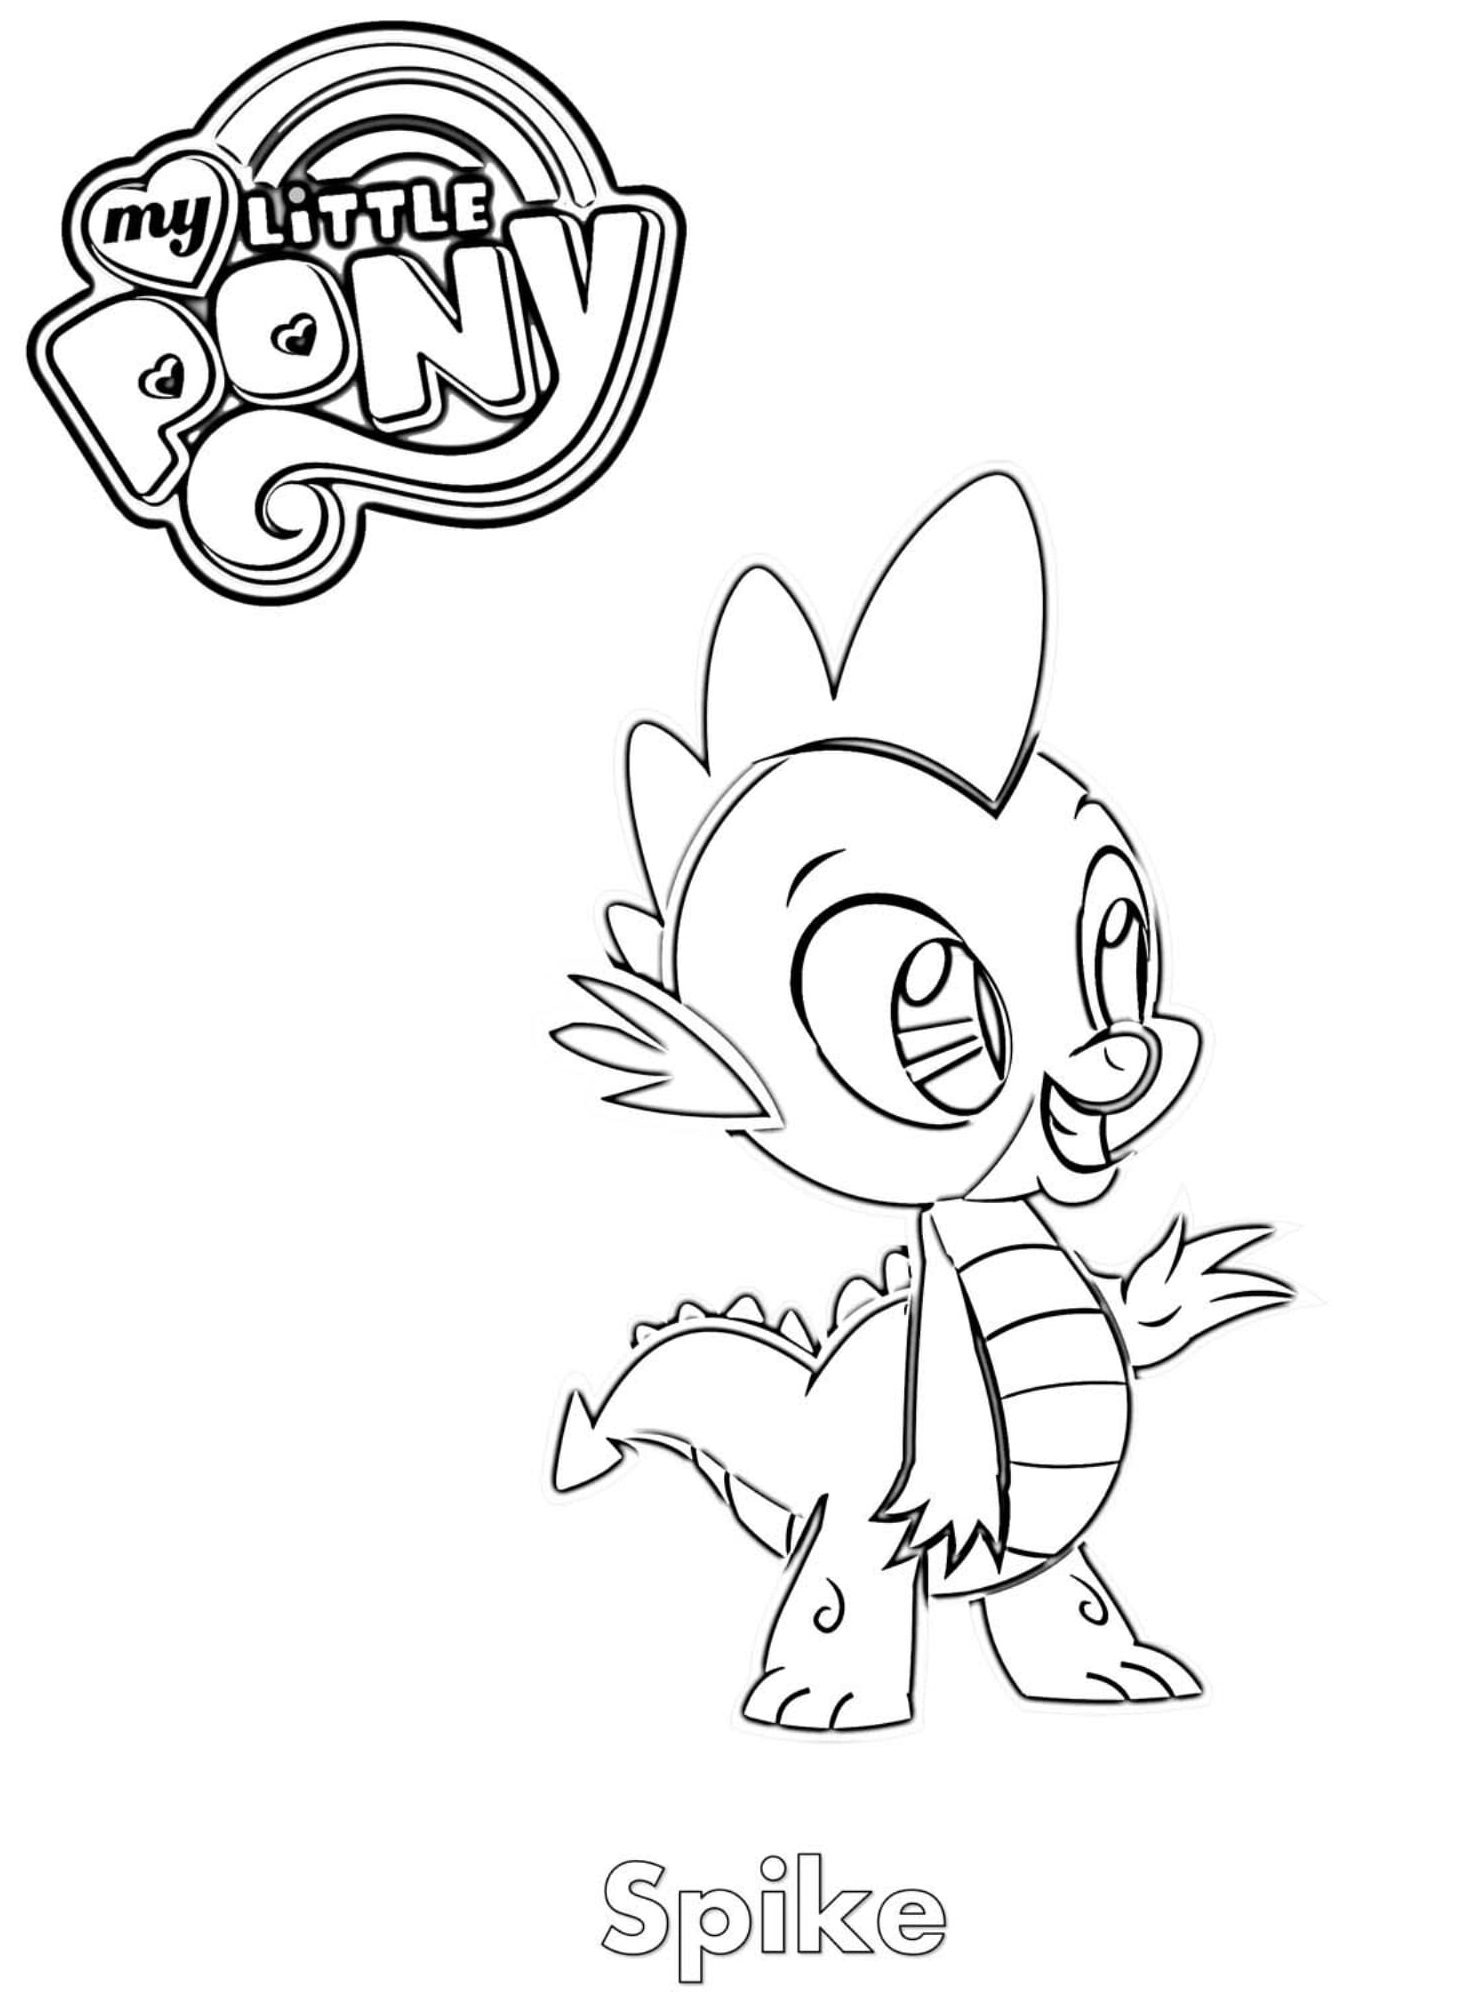 Spike MLP Coloring Page